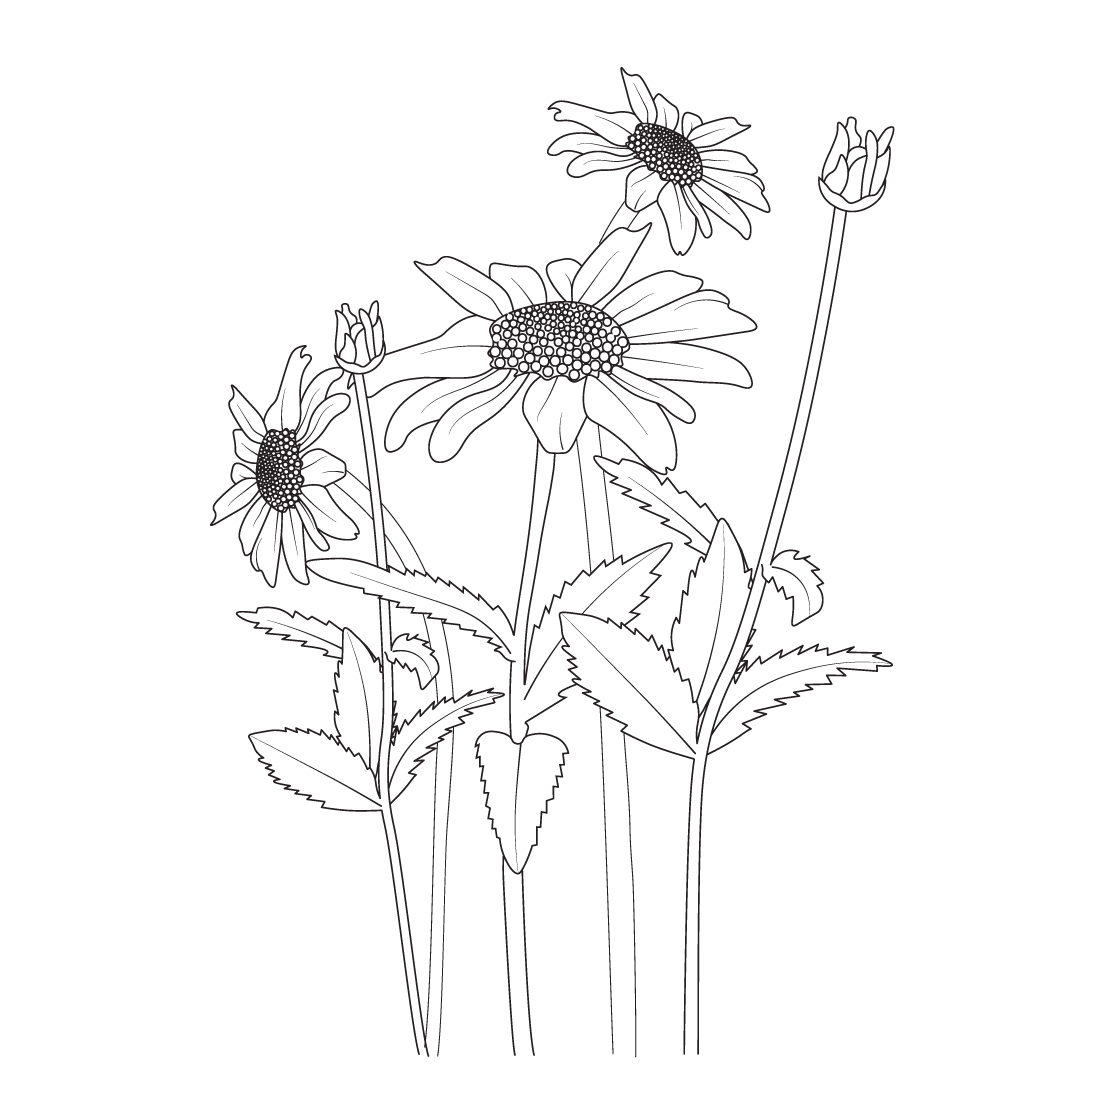 botanical daisy flower illustration daisy flower branch vector line art, daisy drawing, daisy drawing outline preview image.